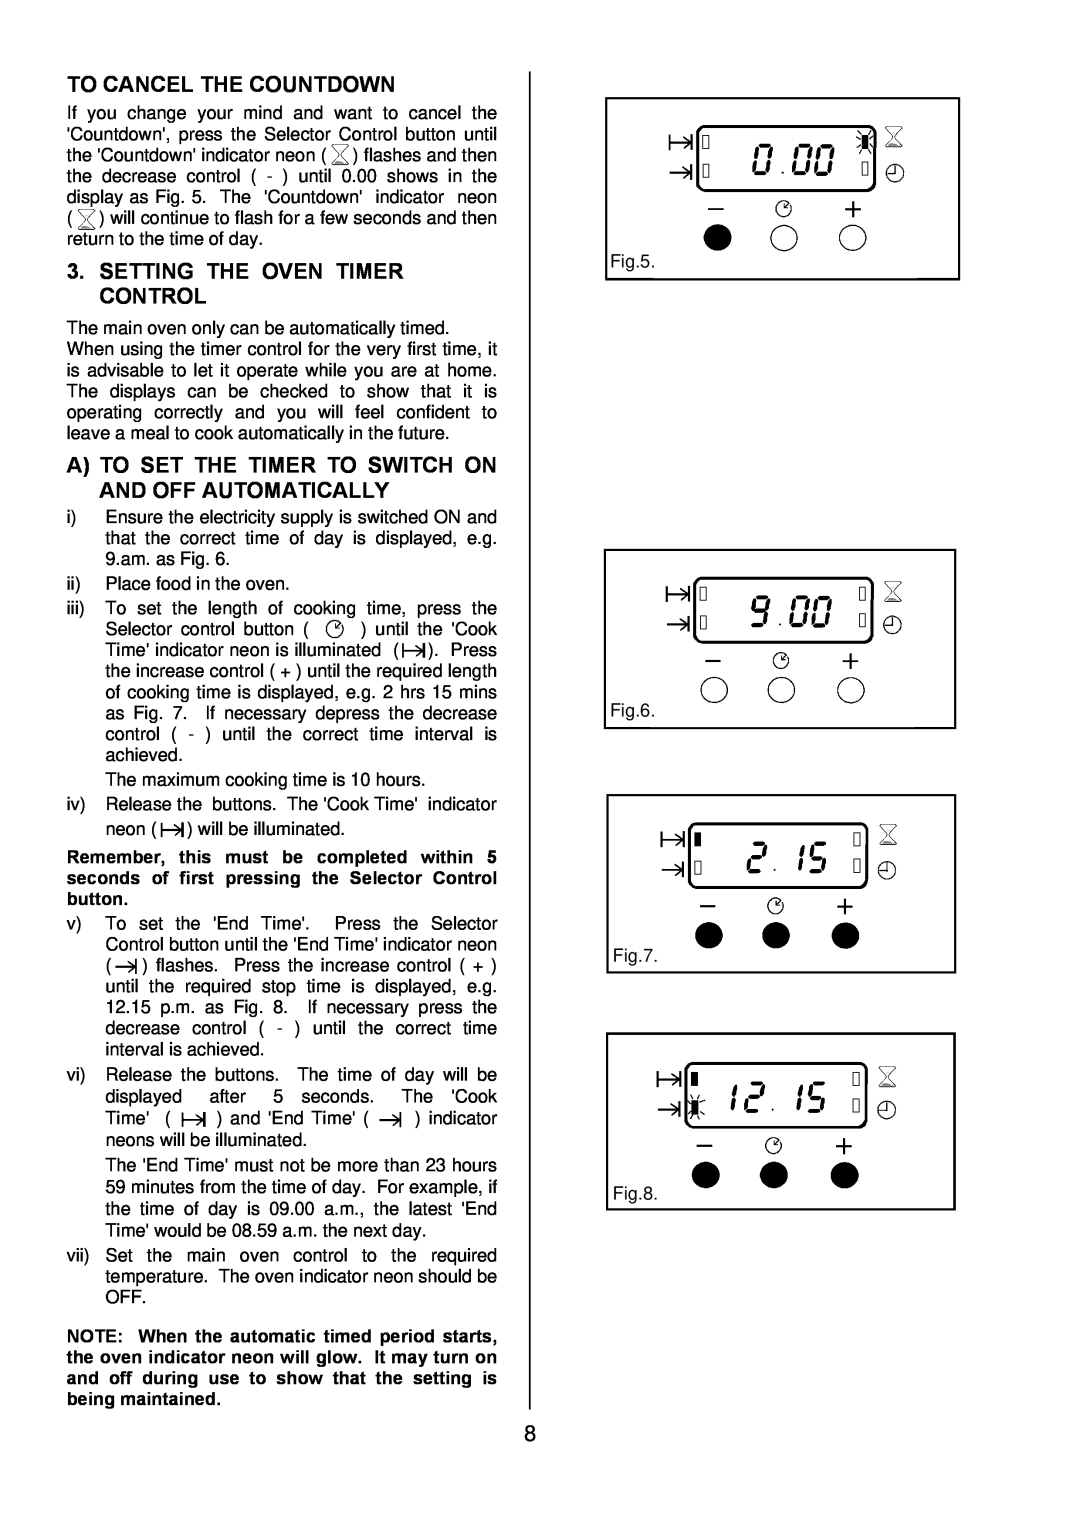 Tricity Bendix TBD950 installation instructions To Cancel The Countdown, Setting The Oven Timer Control 